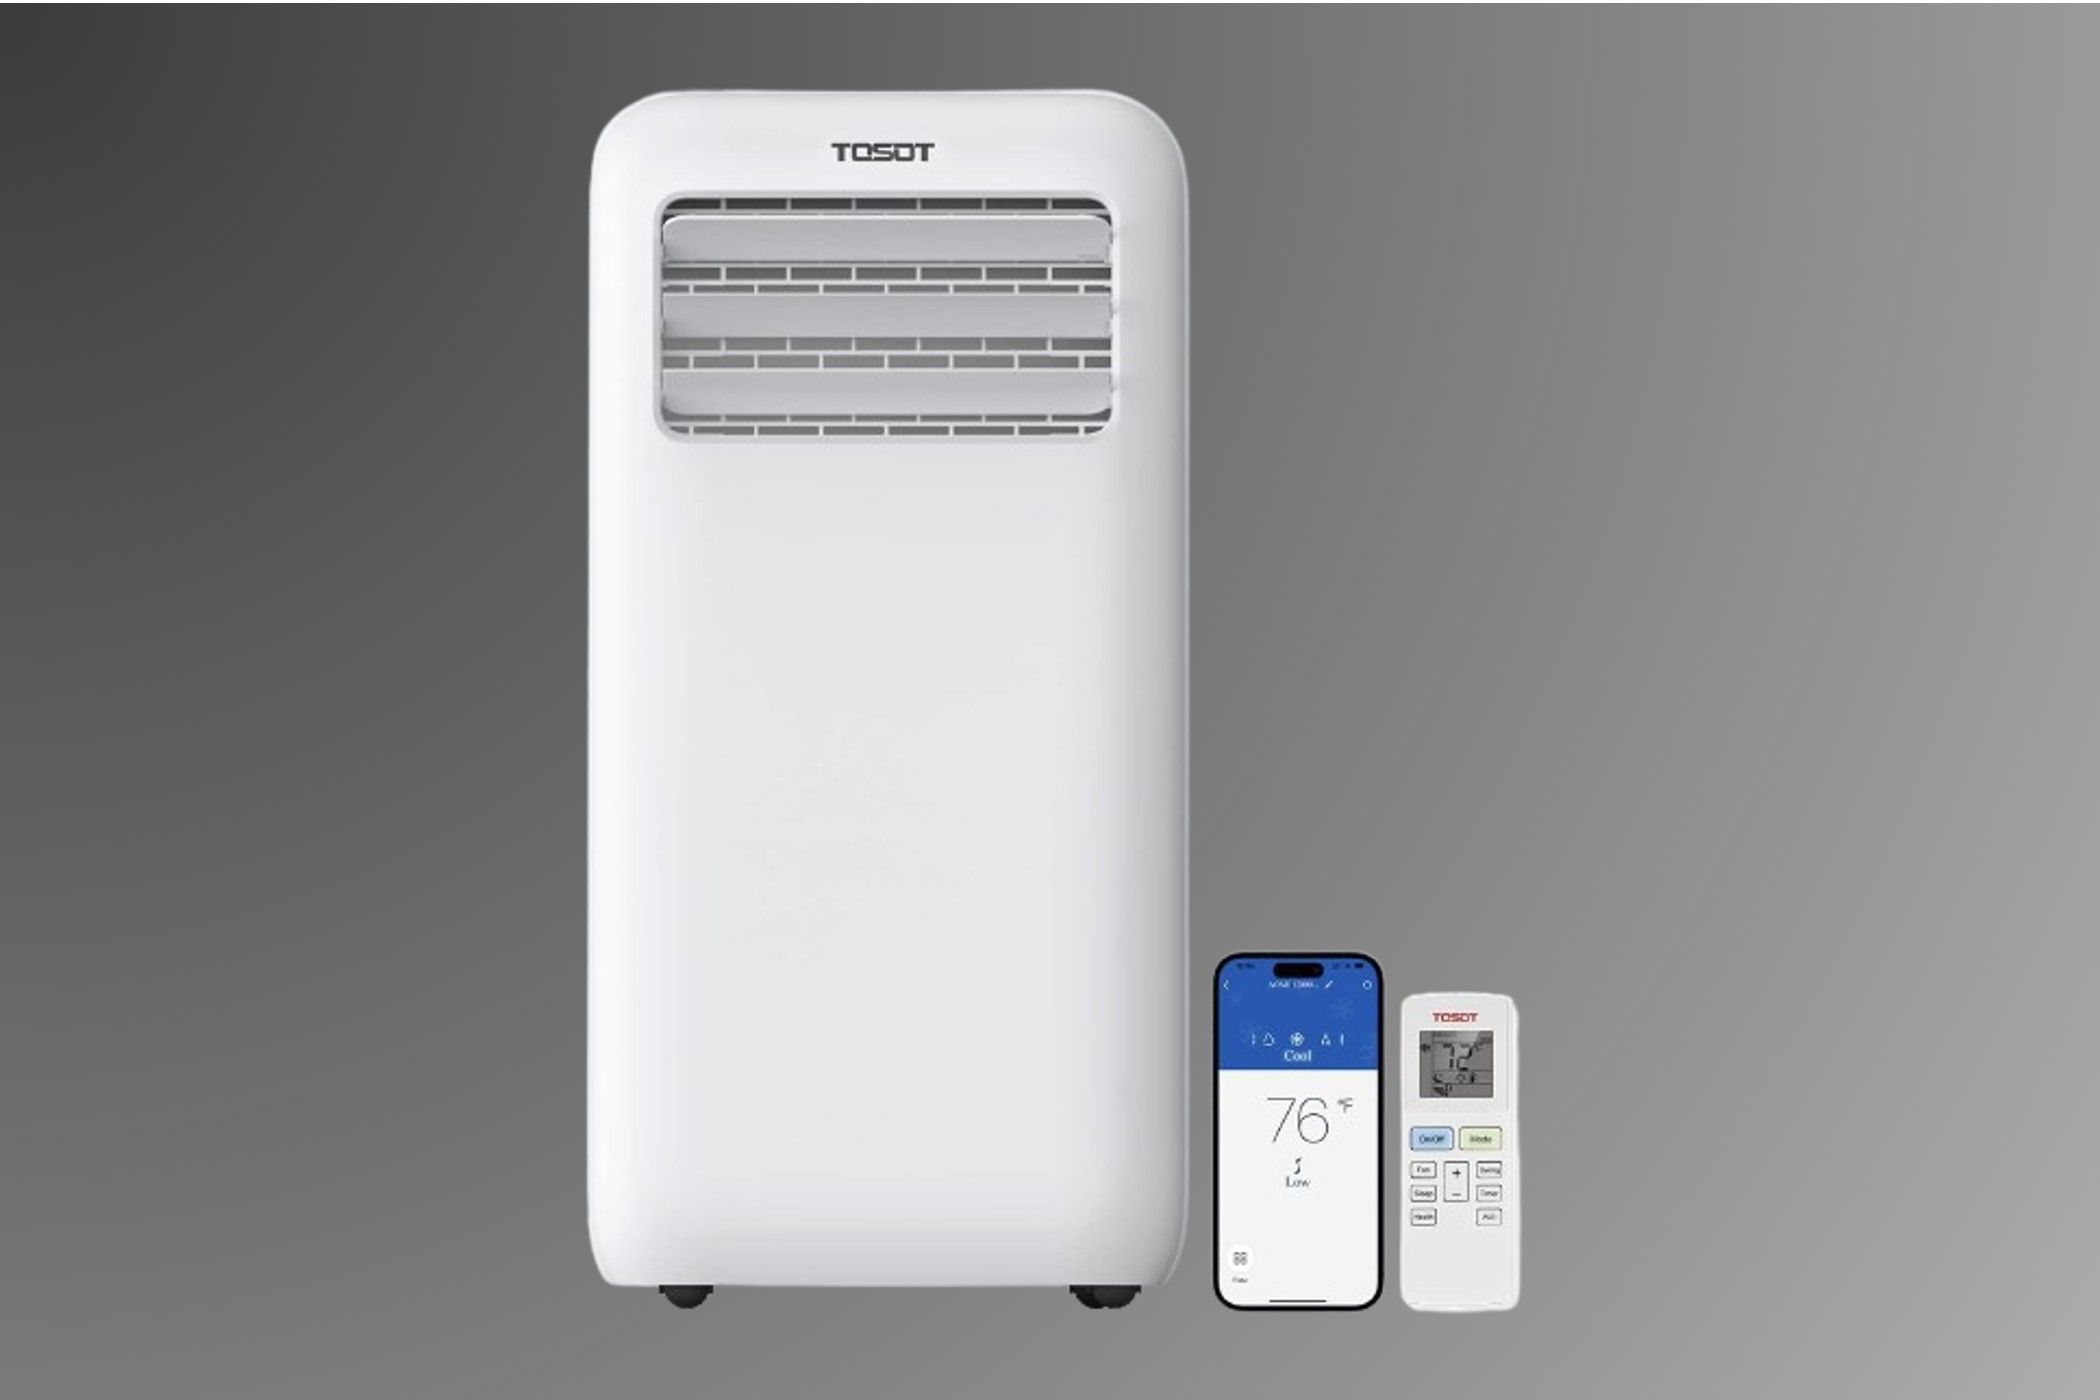 TOSOT Portable Smart Air Conditioner on a gradient background